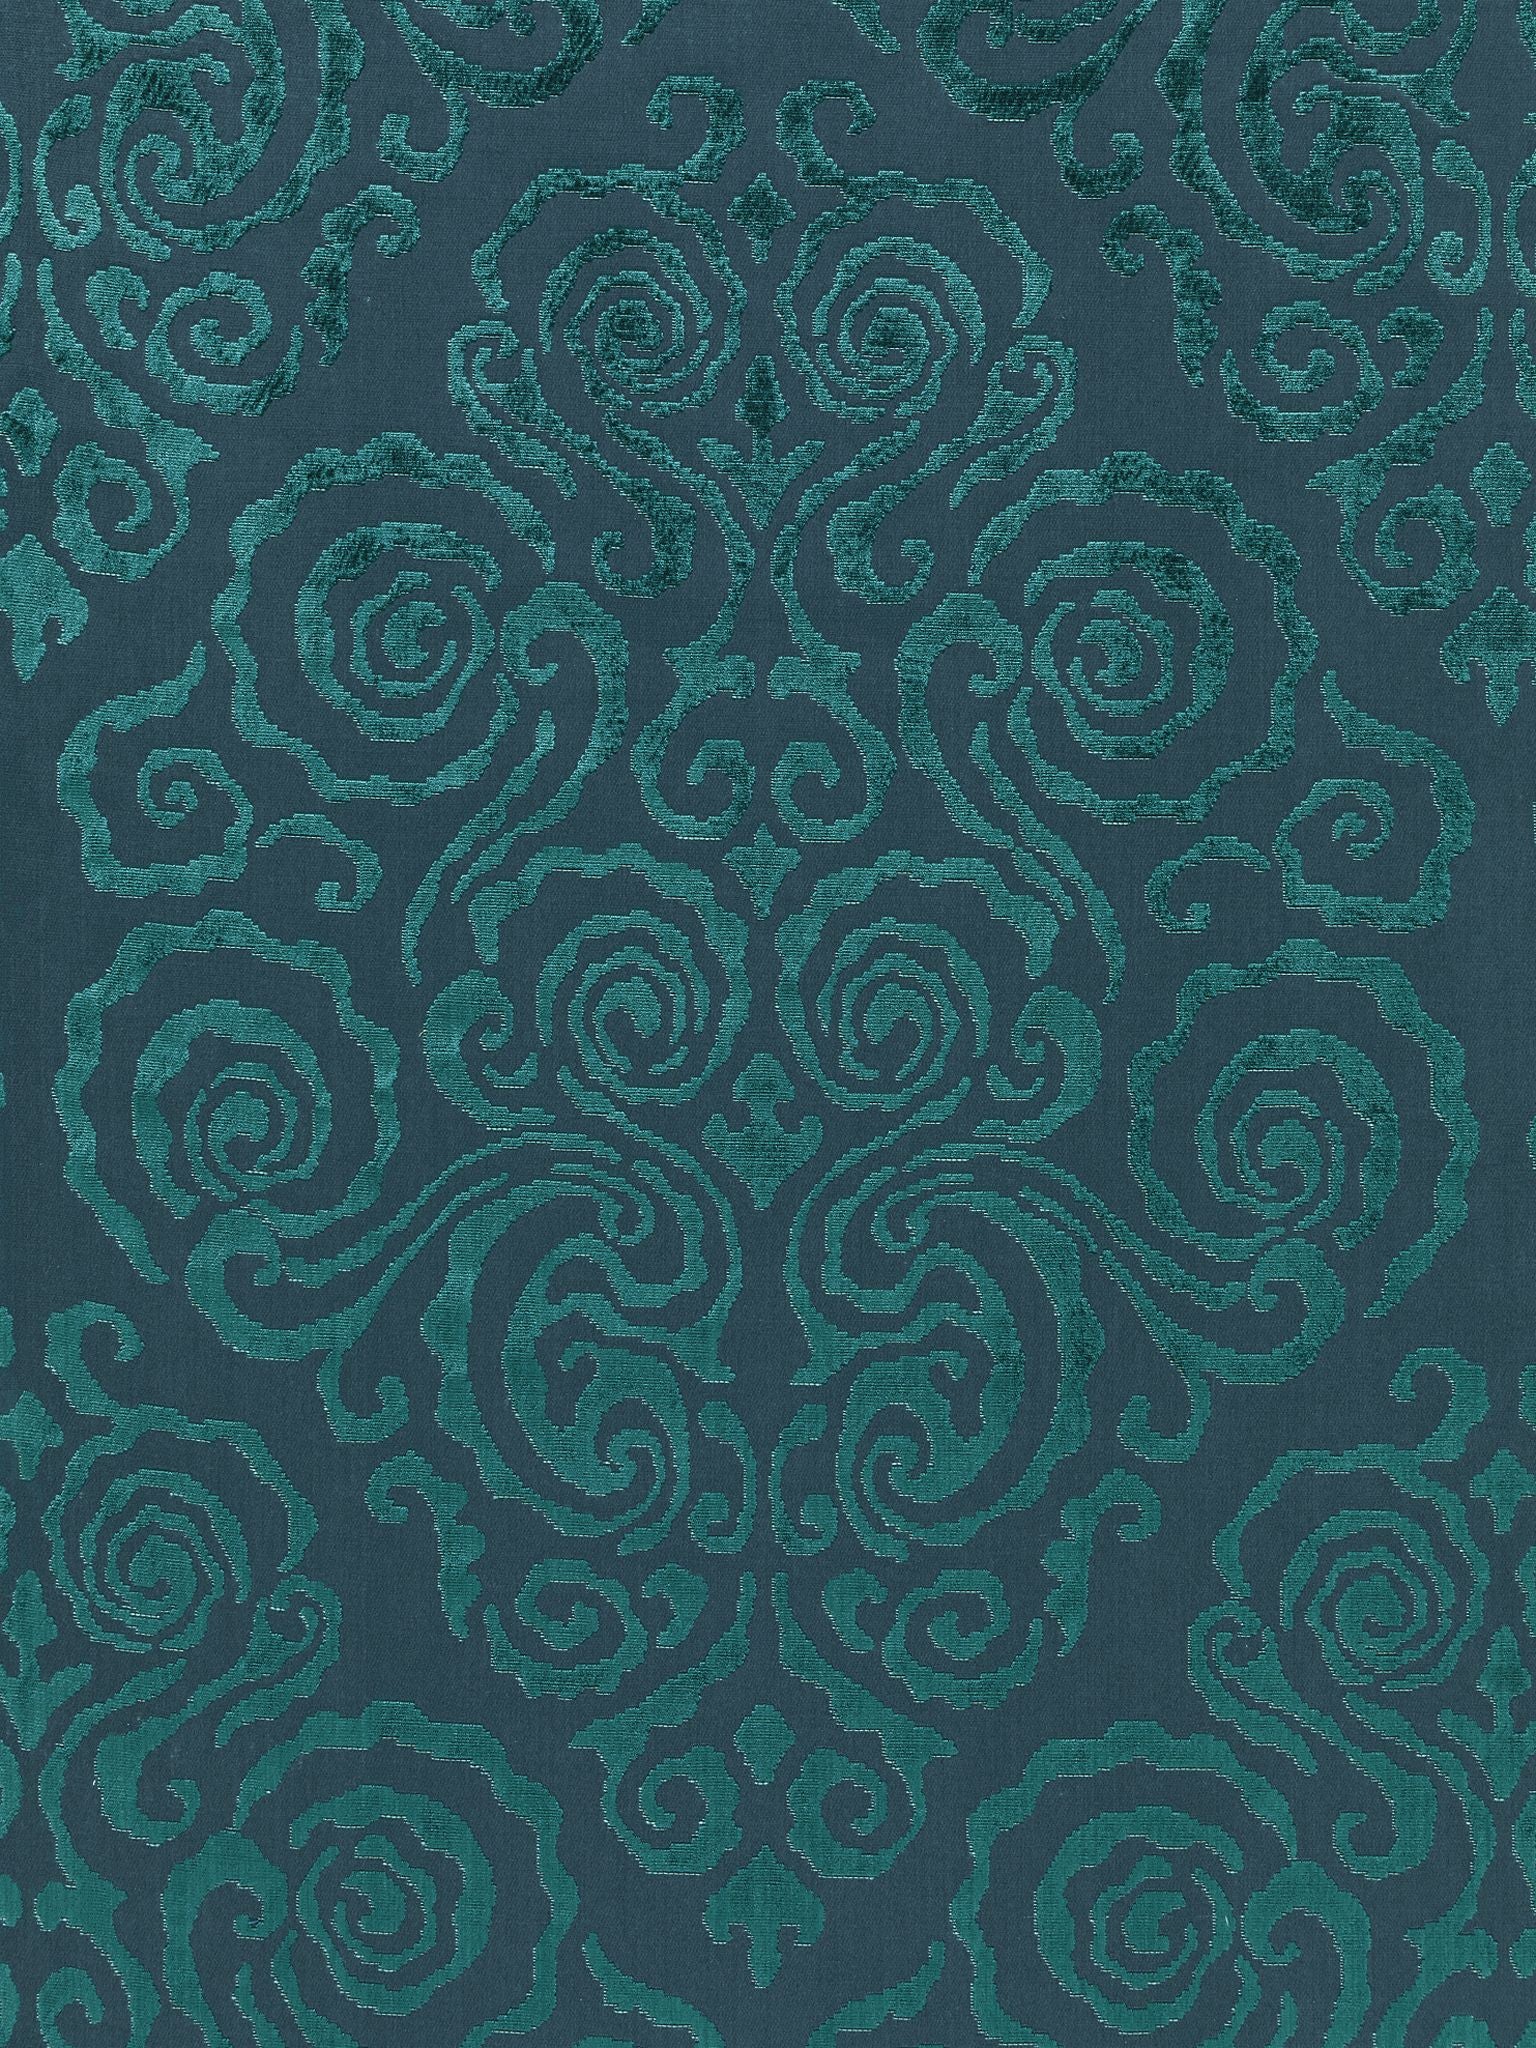 Cirrus Velvet Damask fabric in emerald color - pattern number SC 000327219 - by Scalamandre in the Scalamandre Fabrics Book 1 collection